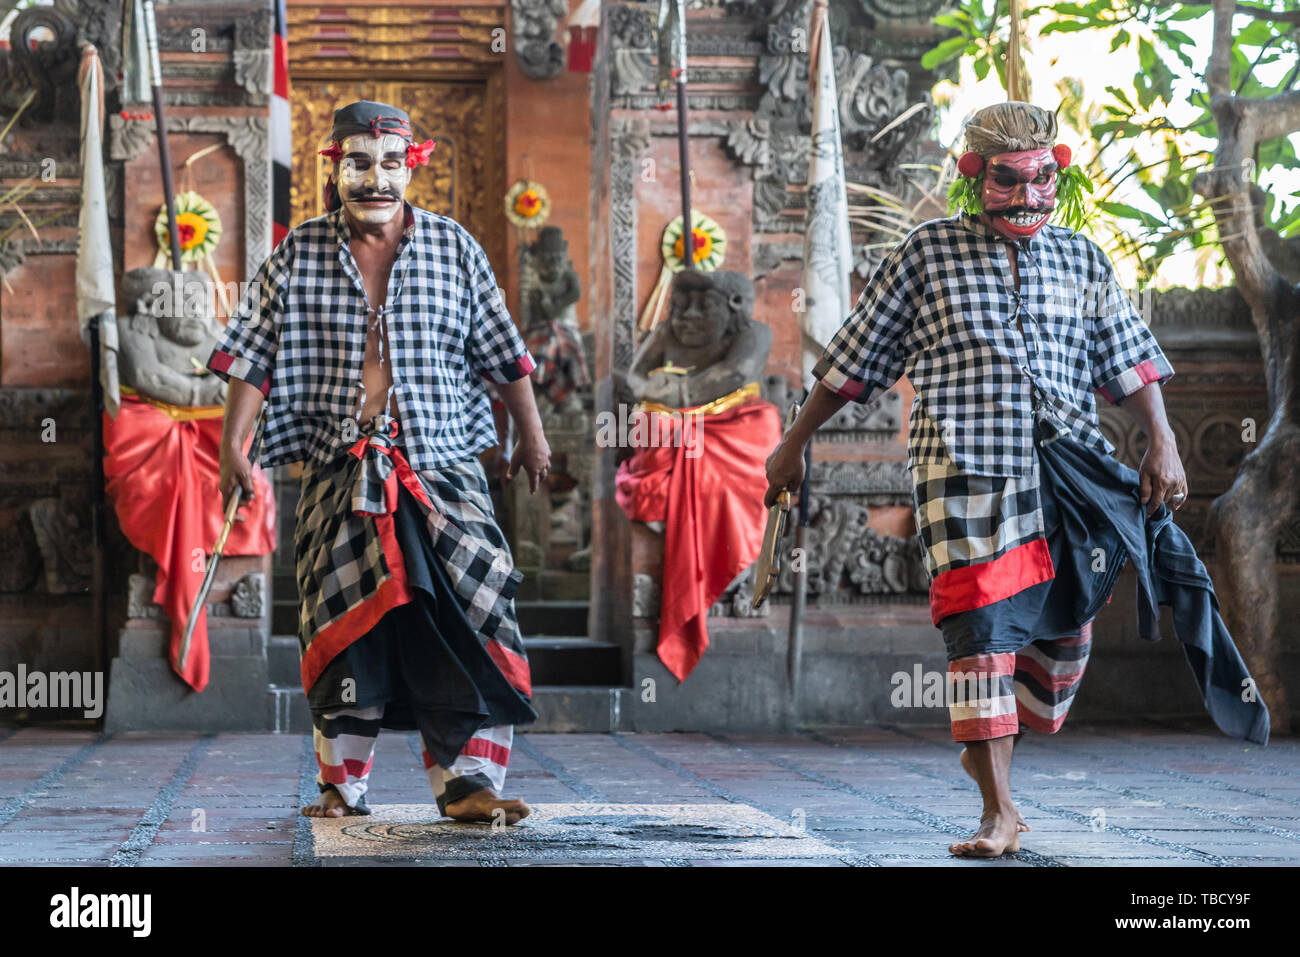 Banjar Gelulung, Bali, Indonesia - February 26, 2019: Mas Village. Play on stage setting. Two bandits dance dressed with gray-white checkered shirts. Stock Photo